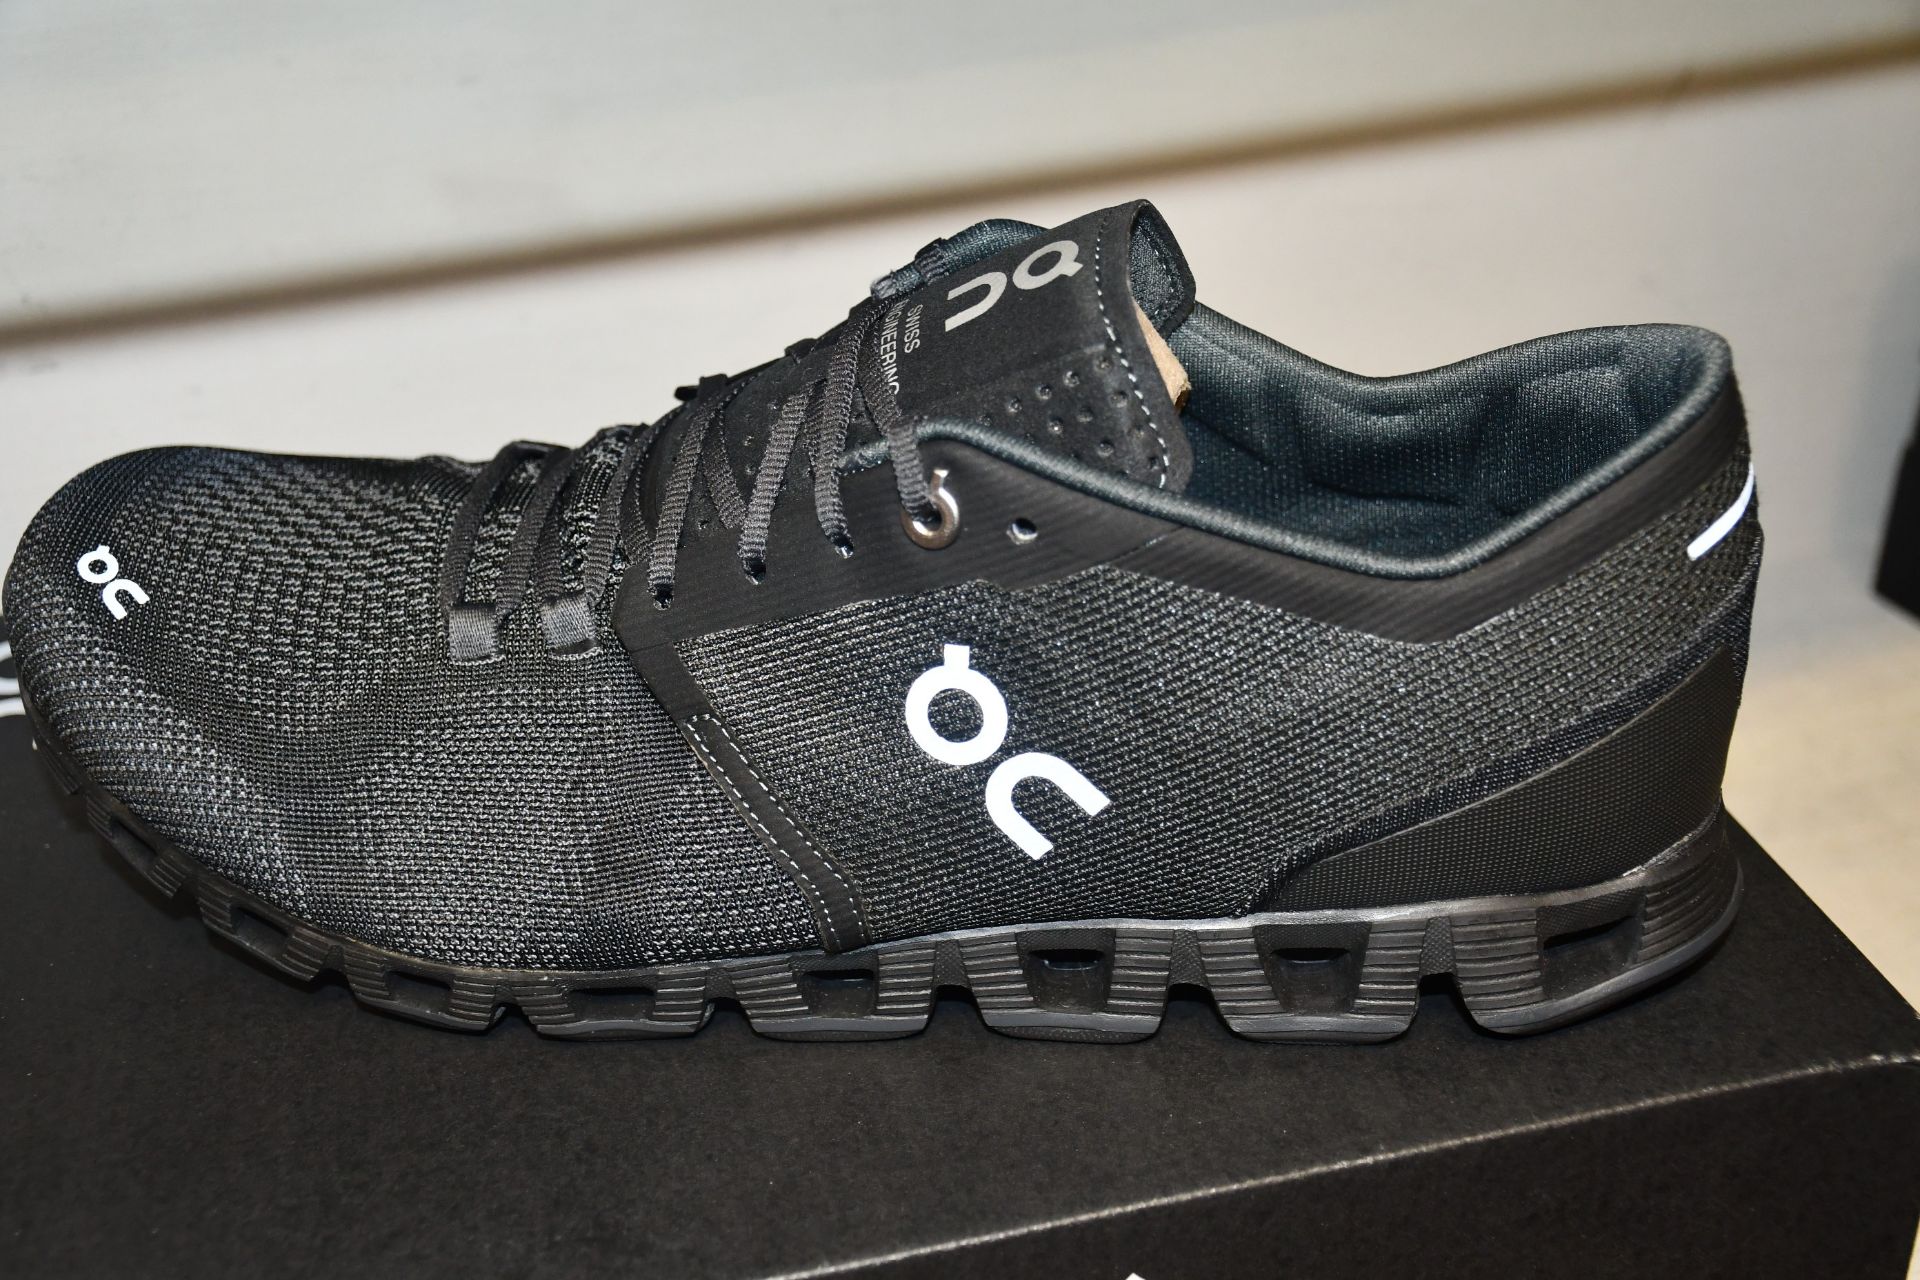 A pair of as new On Cloud X running shoes (UK 9.5).